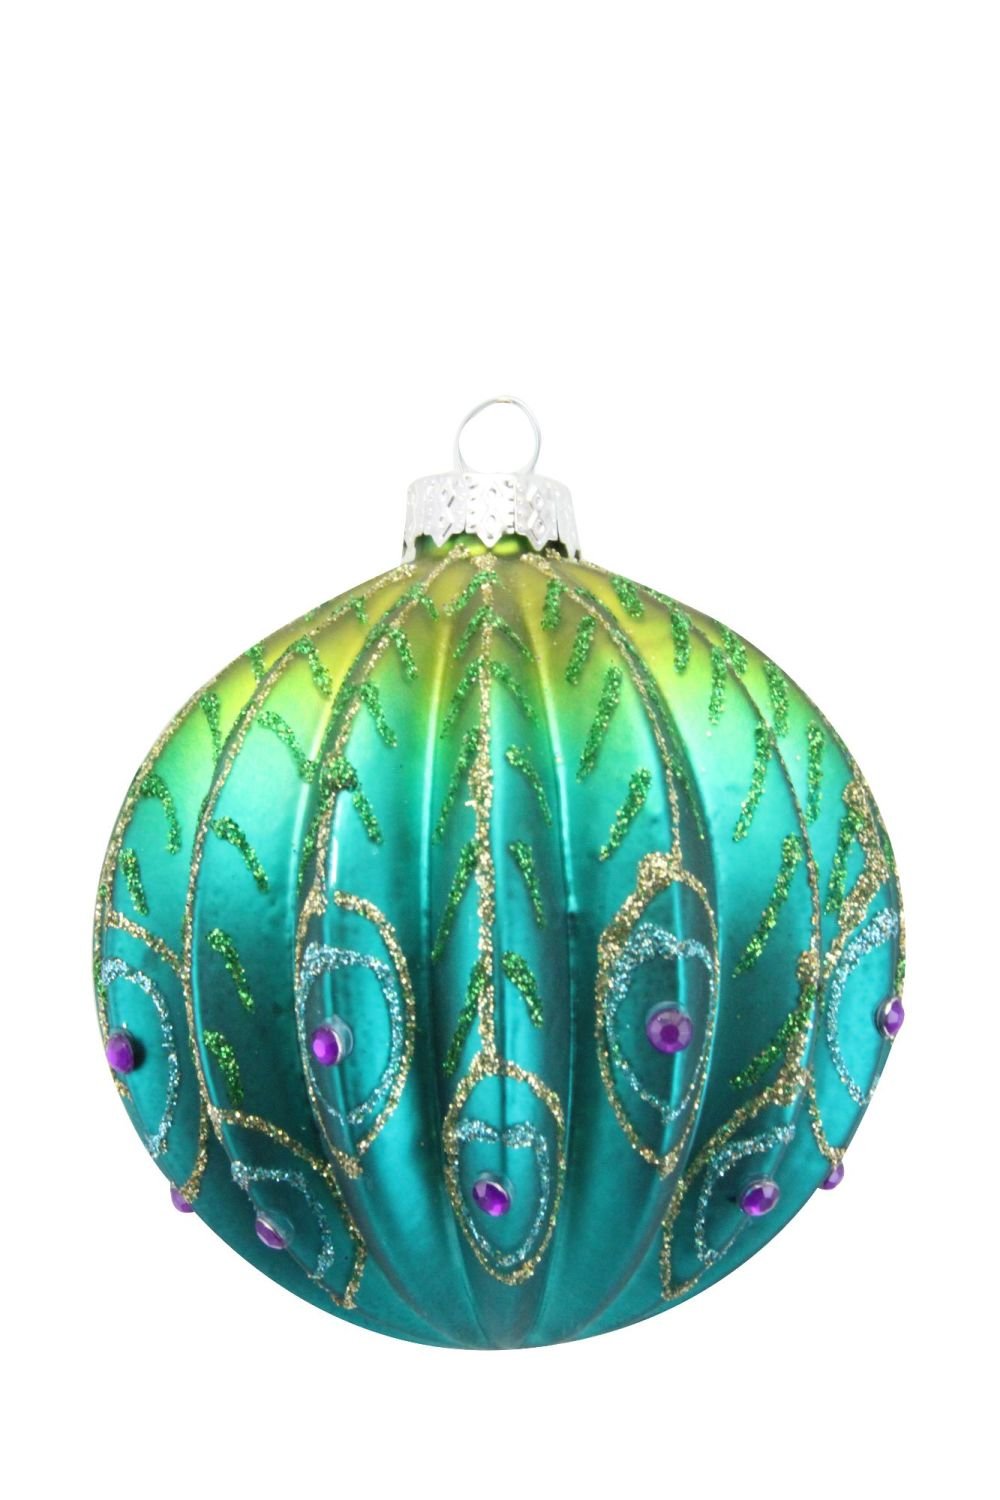 Ribbed Glass Peacock Bauble 